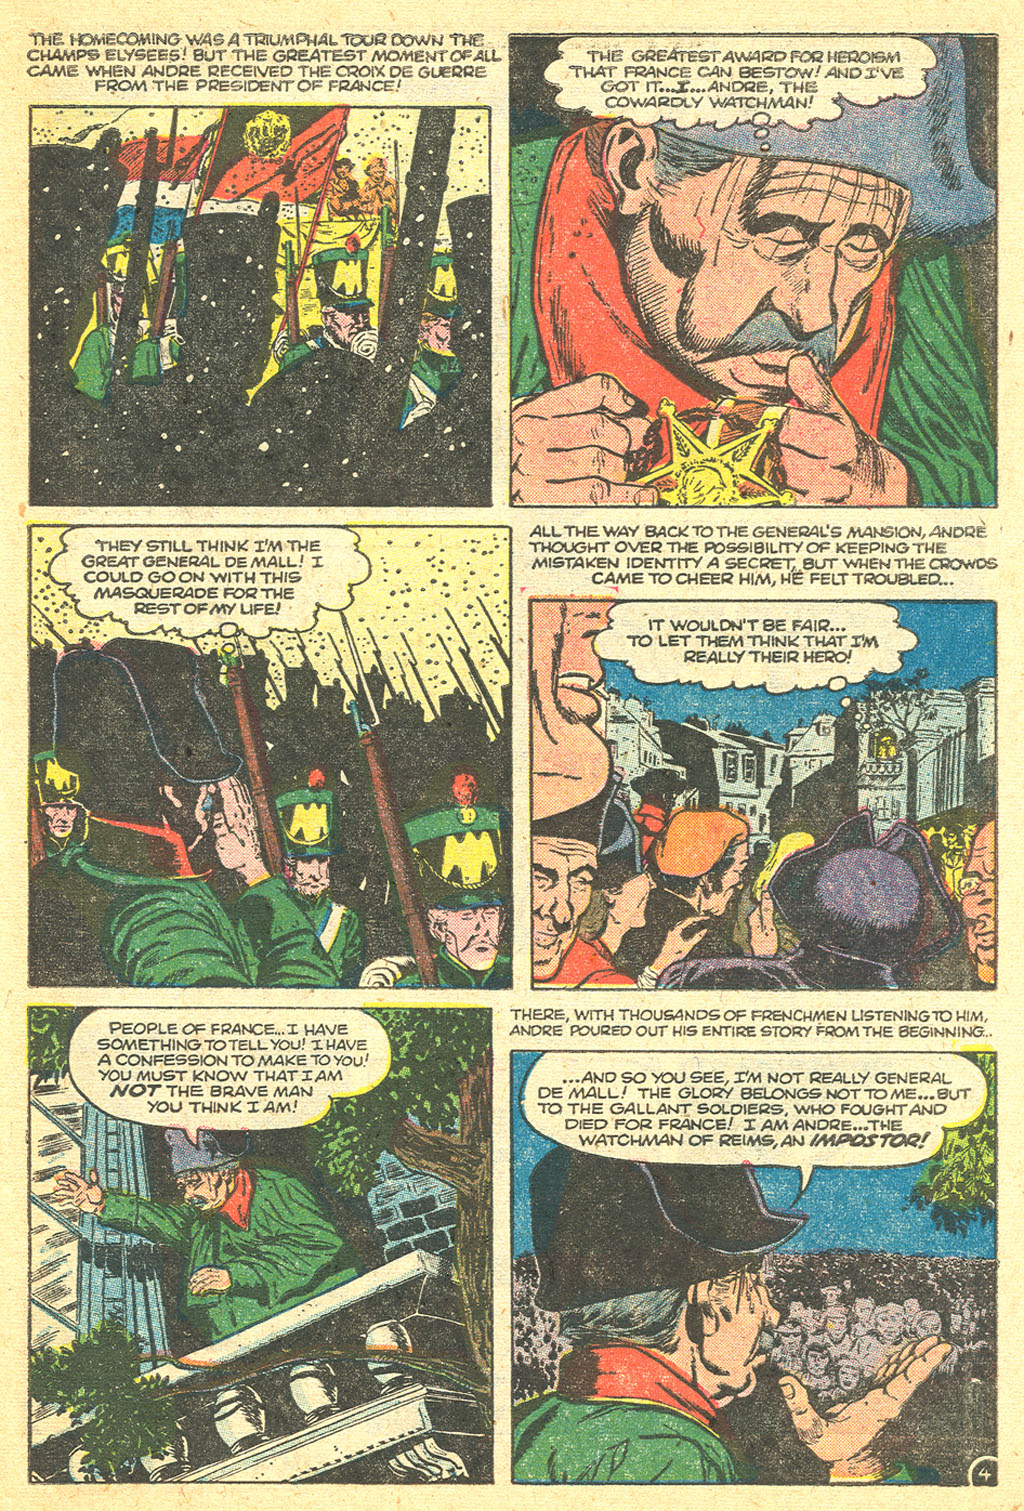 Marvel Tales (1949) 133 Page 30